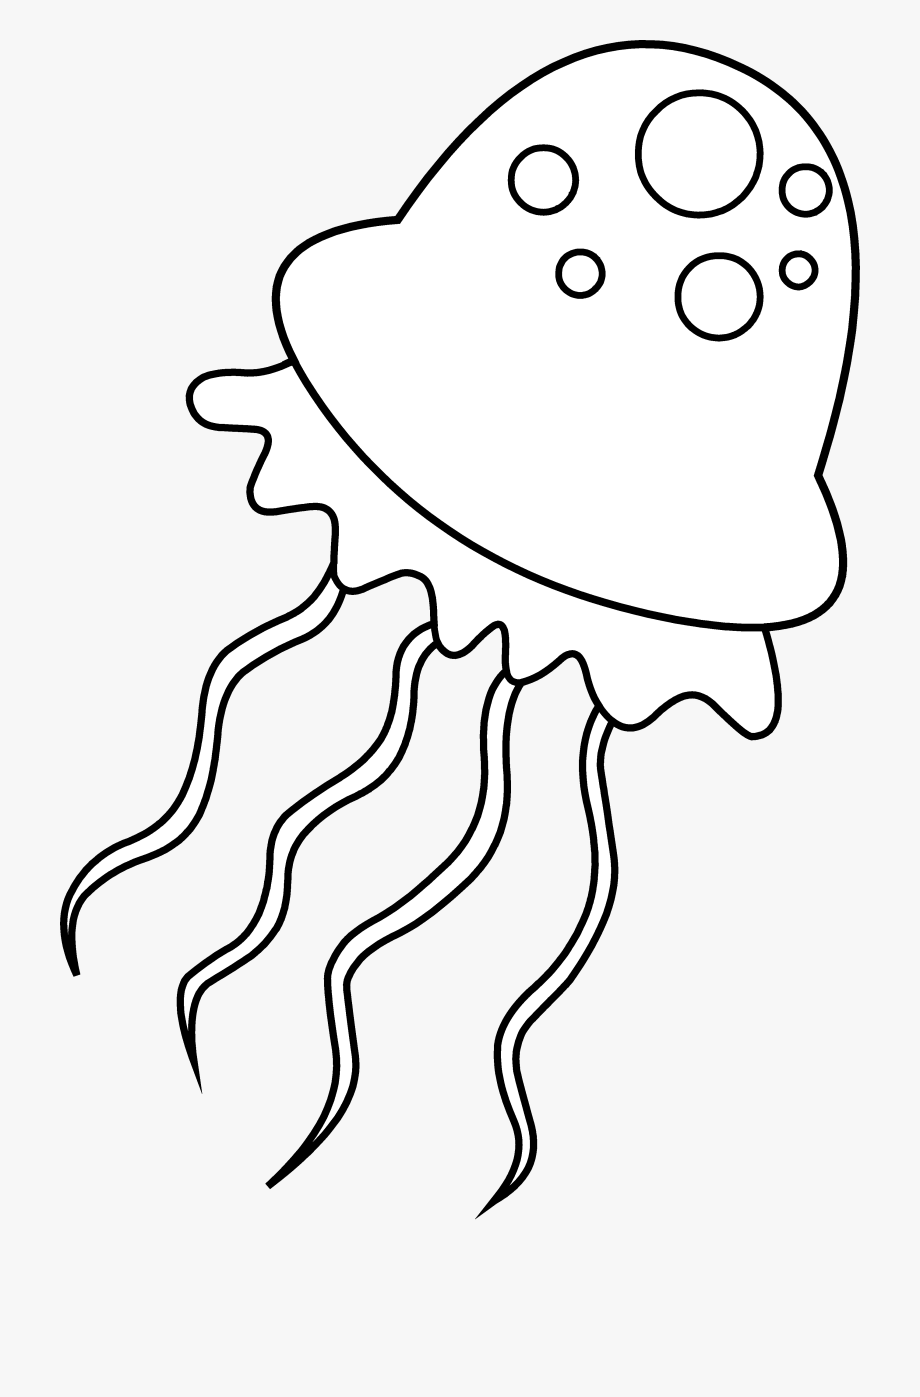 Jellyfish clipart colouring page, Jellyfish colouring page Transparent